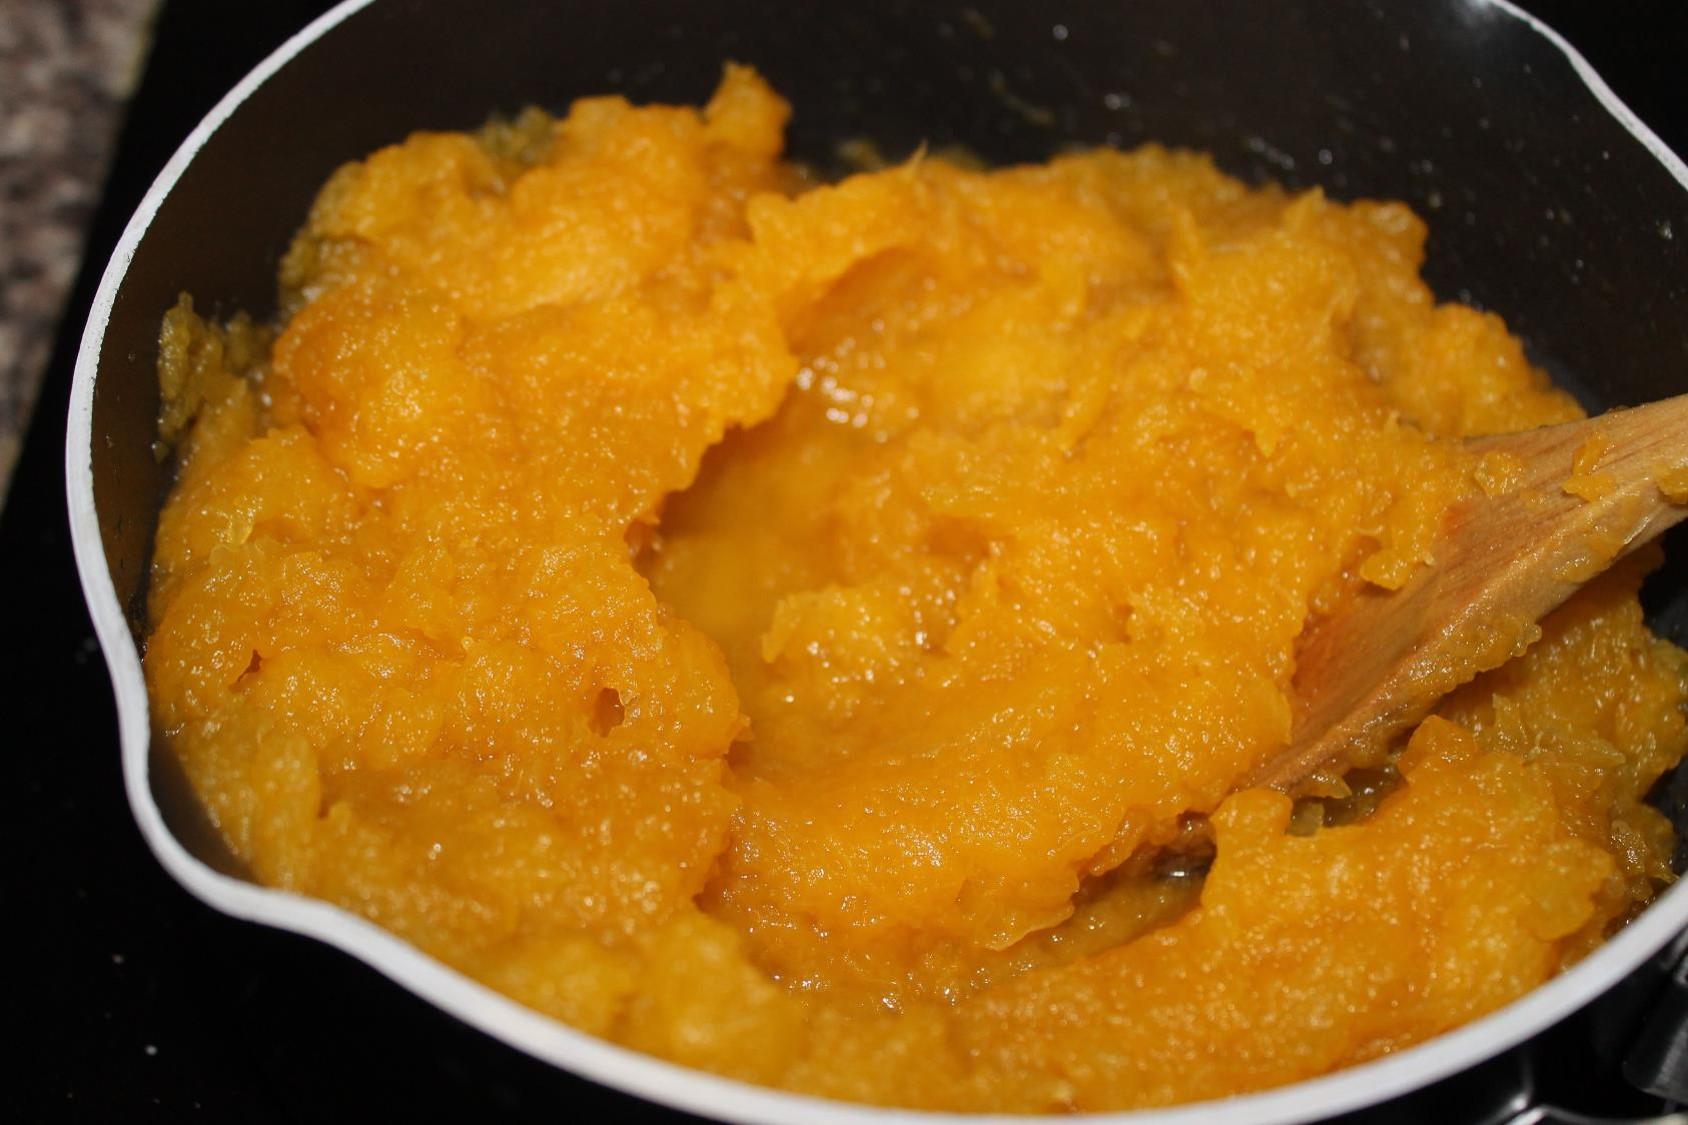 Spiced Pumpkin with white chocolate sauce 3